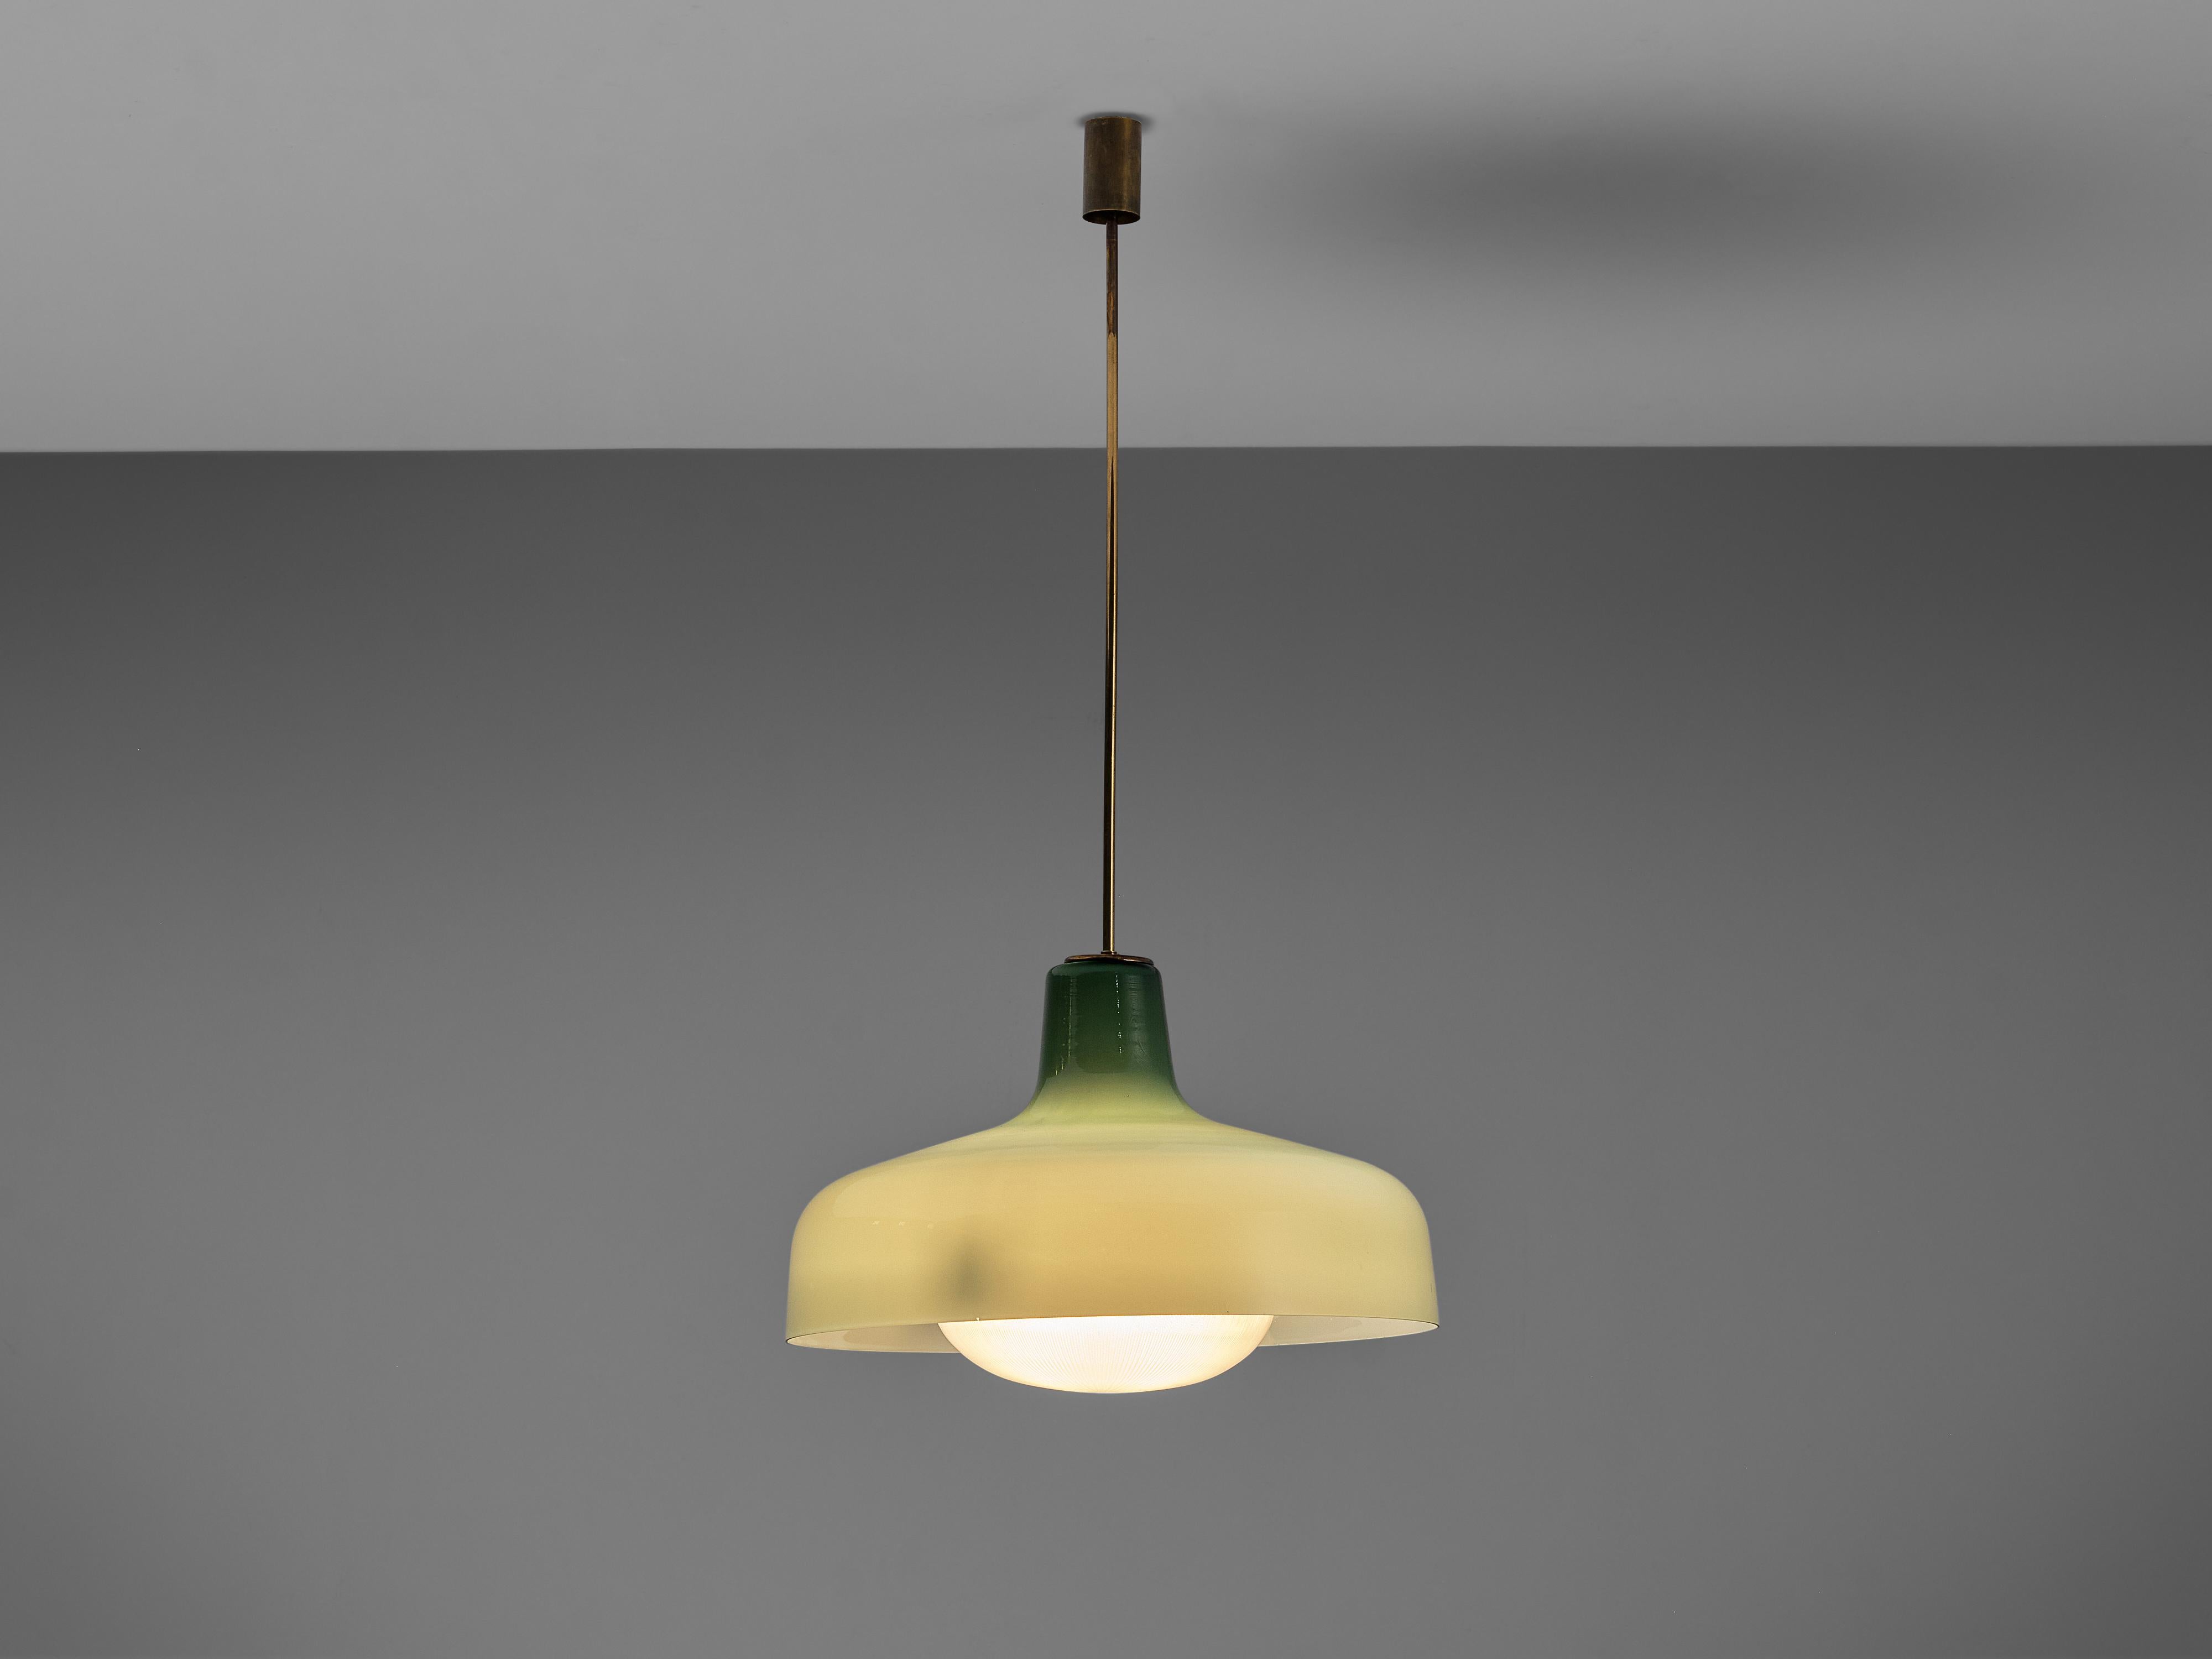 Ignazio Gardella for Azucena, pendant model ‘Paolina’, green opaline glass, brass, Italy, 1957

This beautiful ‘Paolina’ lamp was designed by the Italian architect Ignazio Gardella in 1957. The gorgeous shade is created in a frosted opaline and